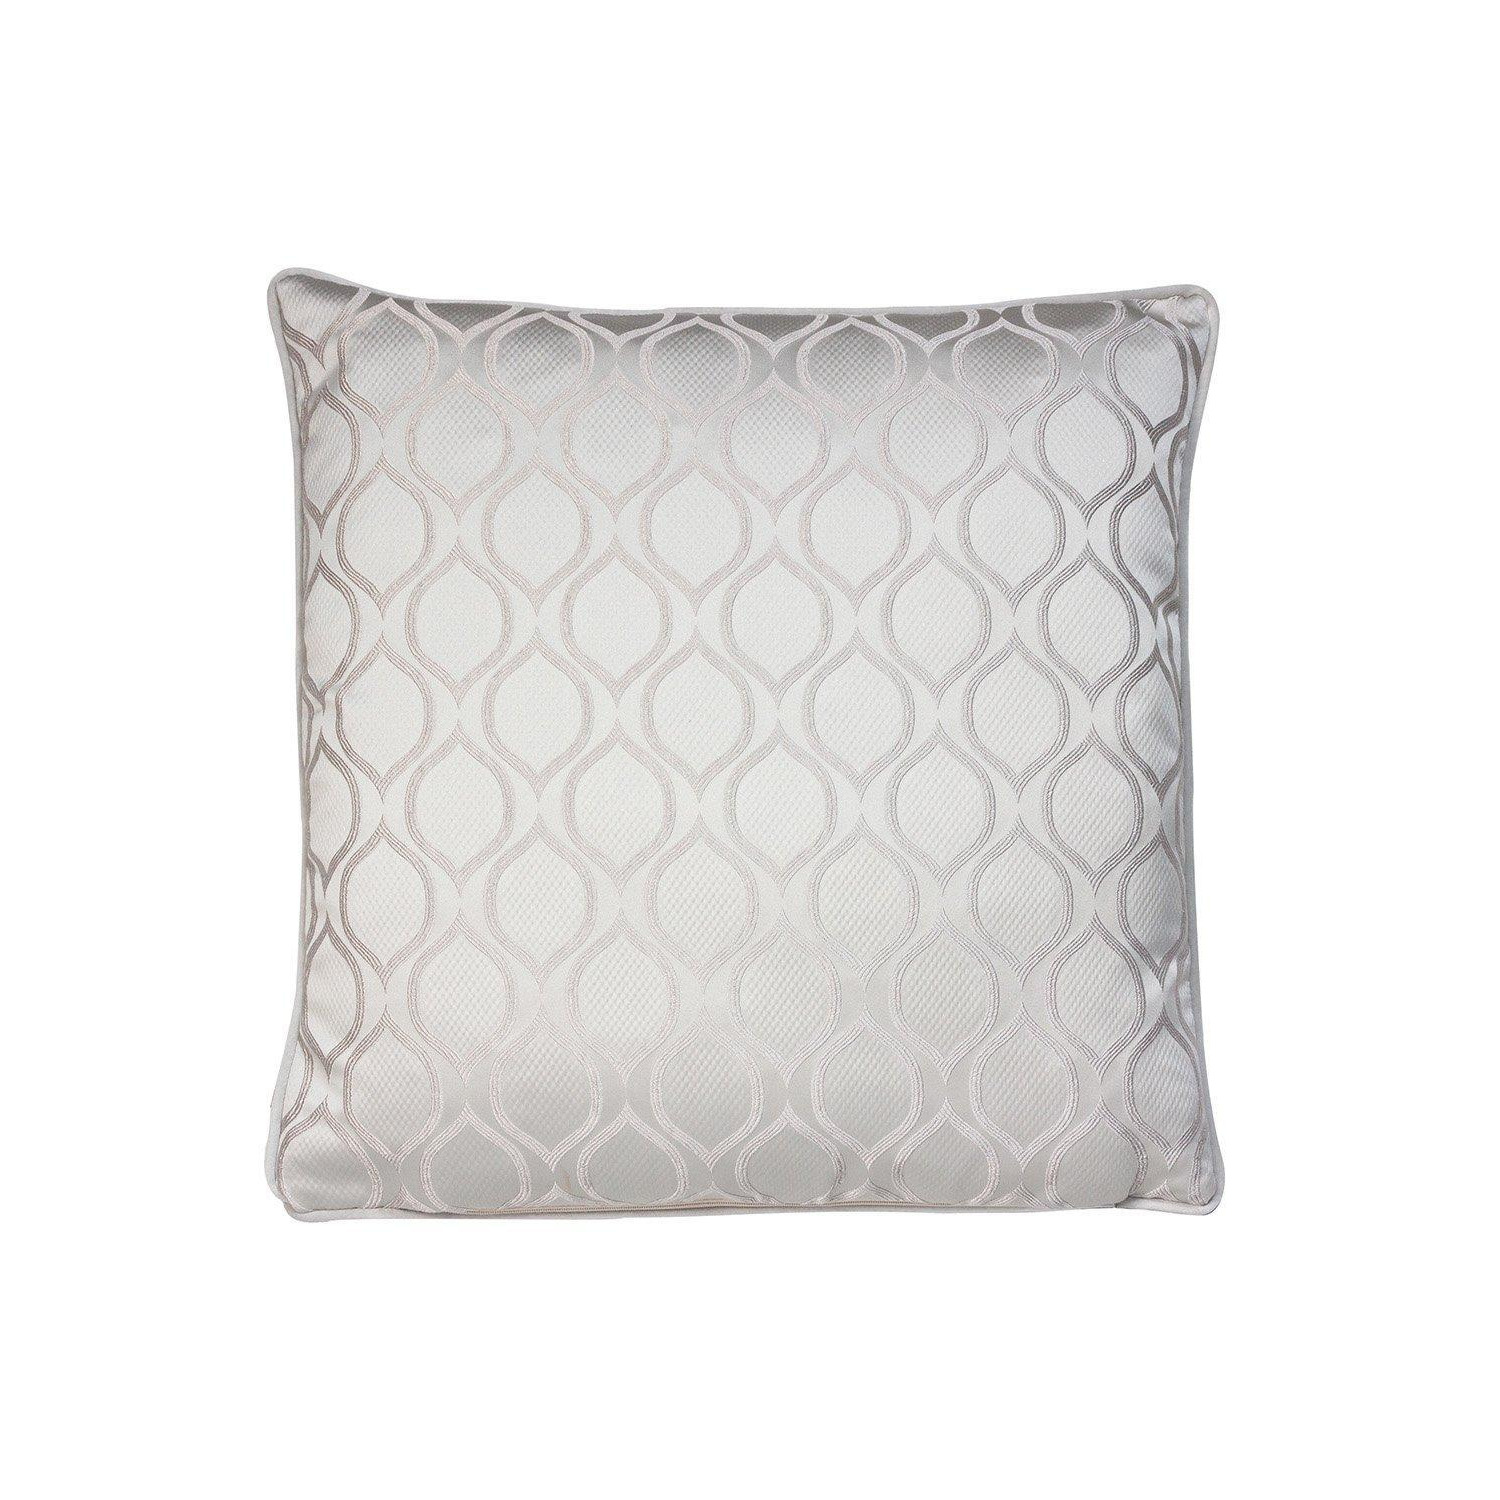 Solitare Geometric Printed Piped Cushion - image 1